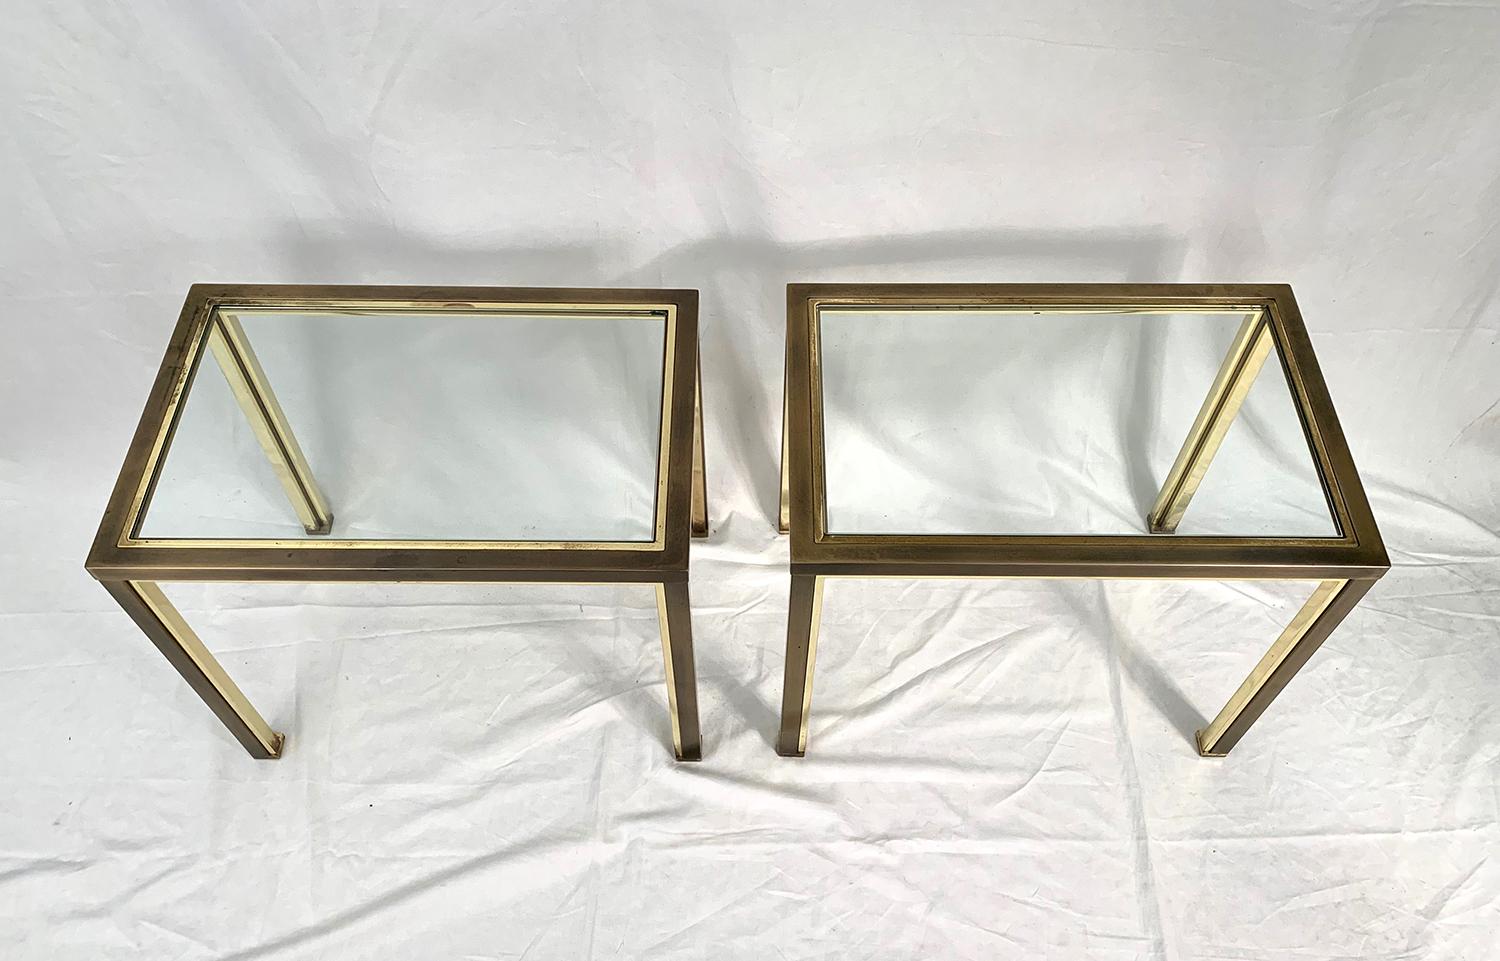 Pair of side tables made of a brushed steel frame, enhanced by a gilded metal cladding and a glass top. The set, manufactured and designed by Belgo Chrome, dates from the 1980s.

Paire de tables d'appoint composées d'un cadre en acier brossé,